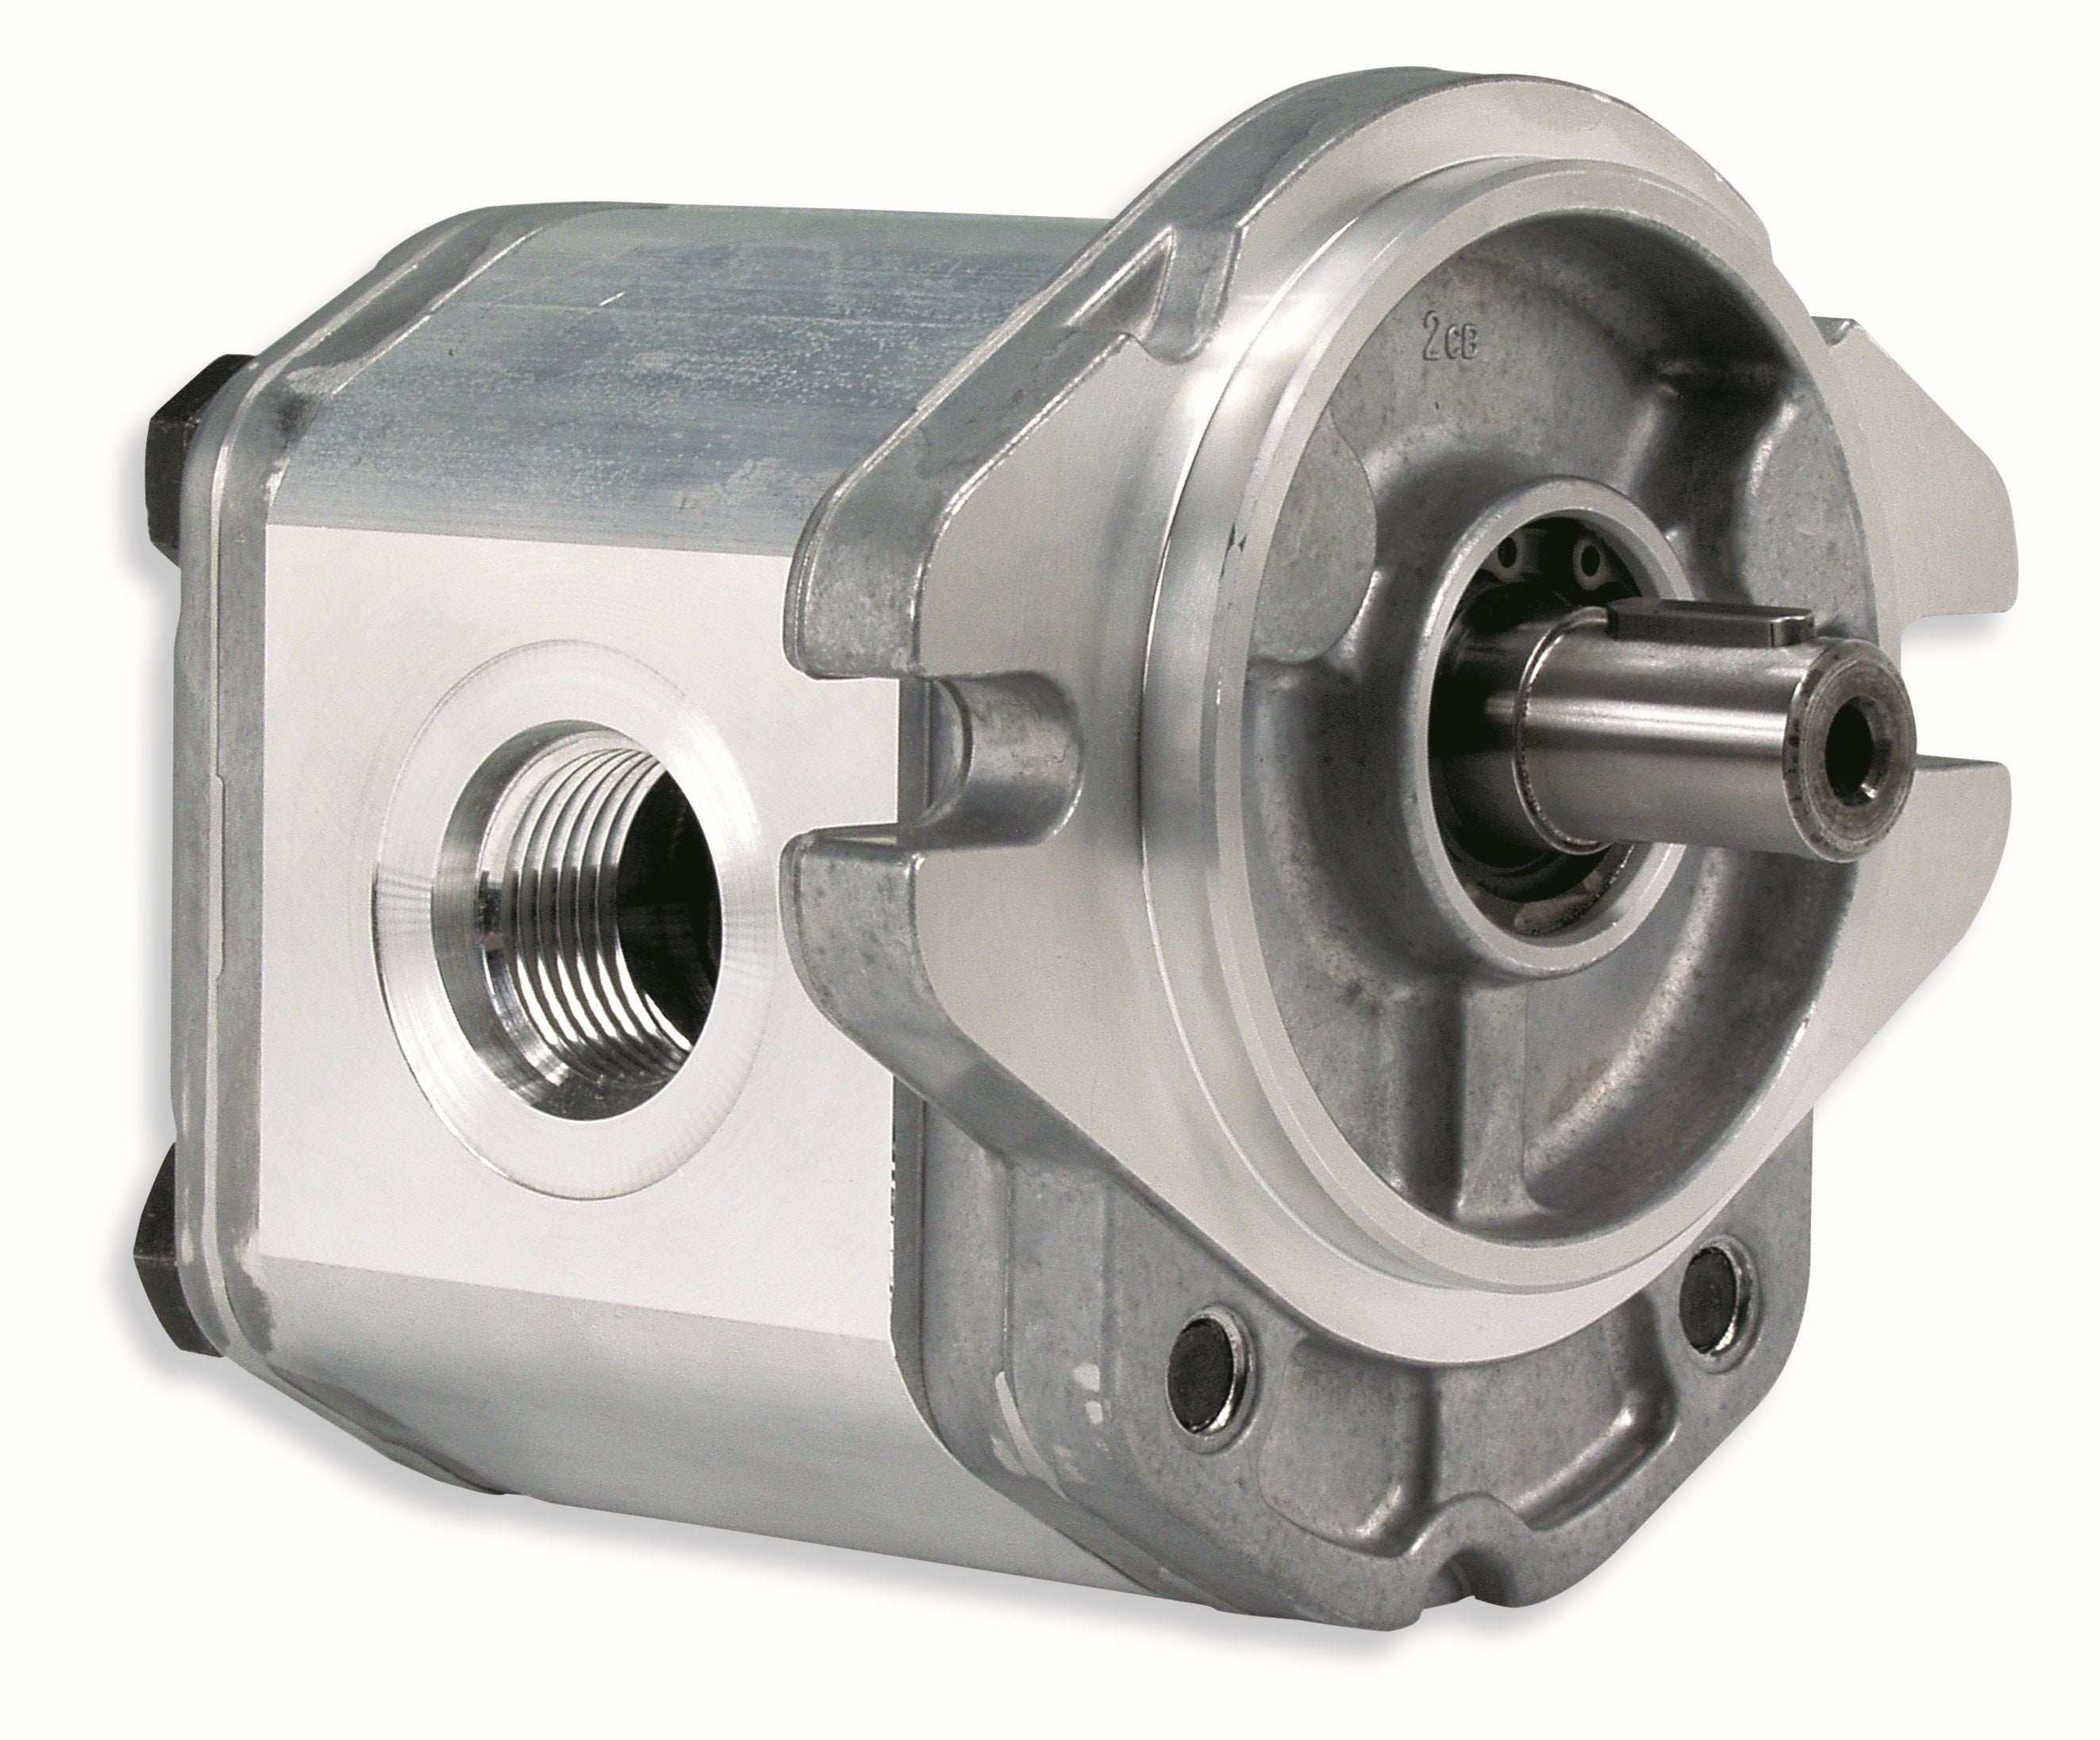 GHM3A-R-66-E4 : Marzocchi Gear Motor, Bidirectional, 44cc, 3625psi rated, 2800RPM, 1" Code 61 ports, 7/8" Bore x 1/4" Keyed Shaft